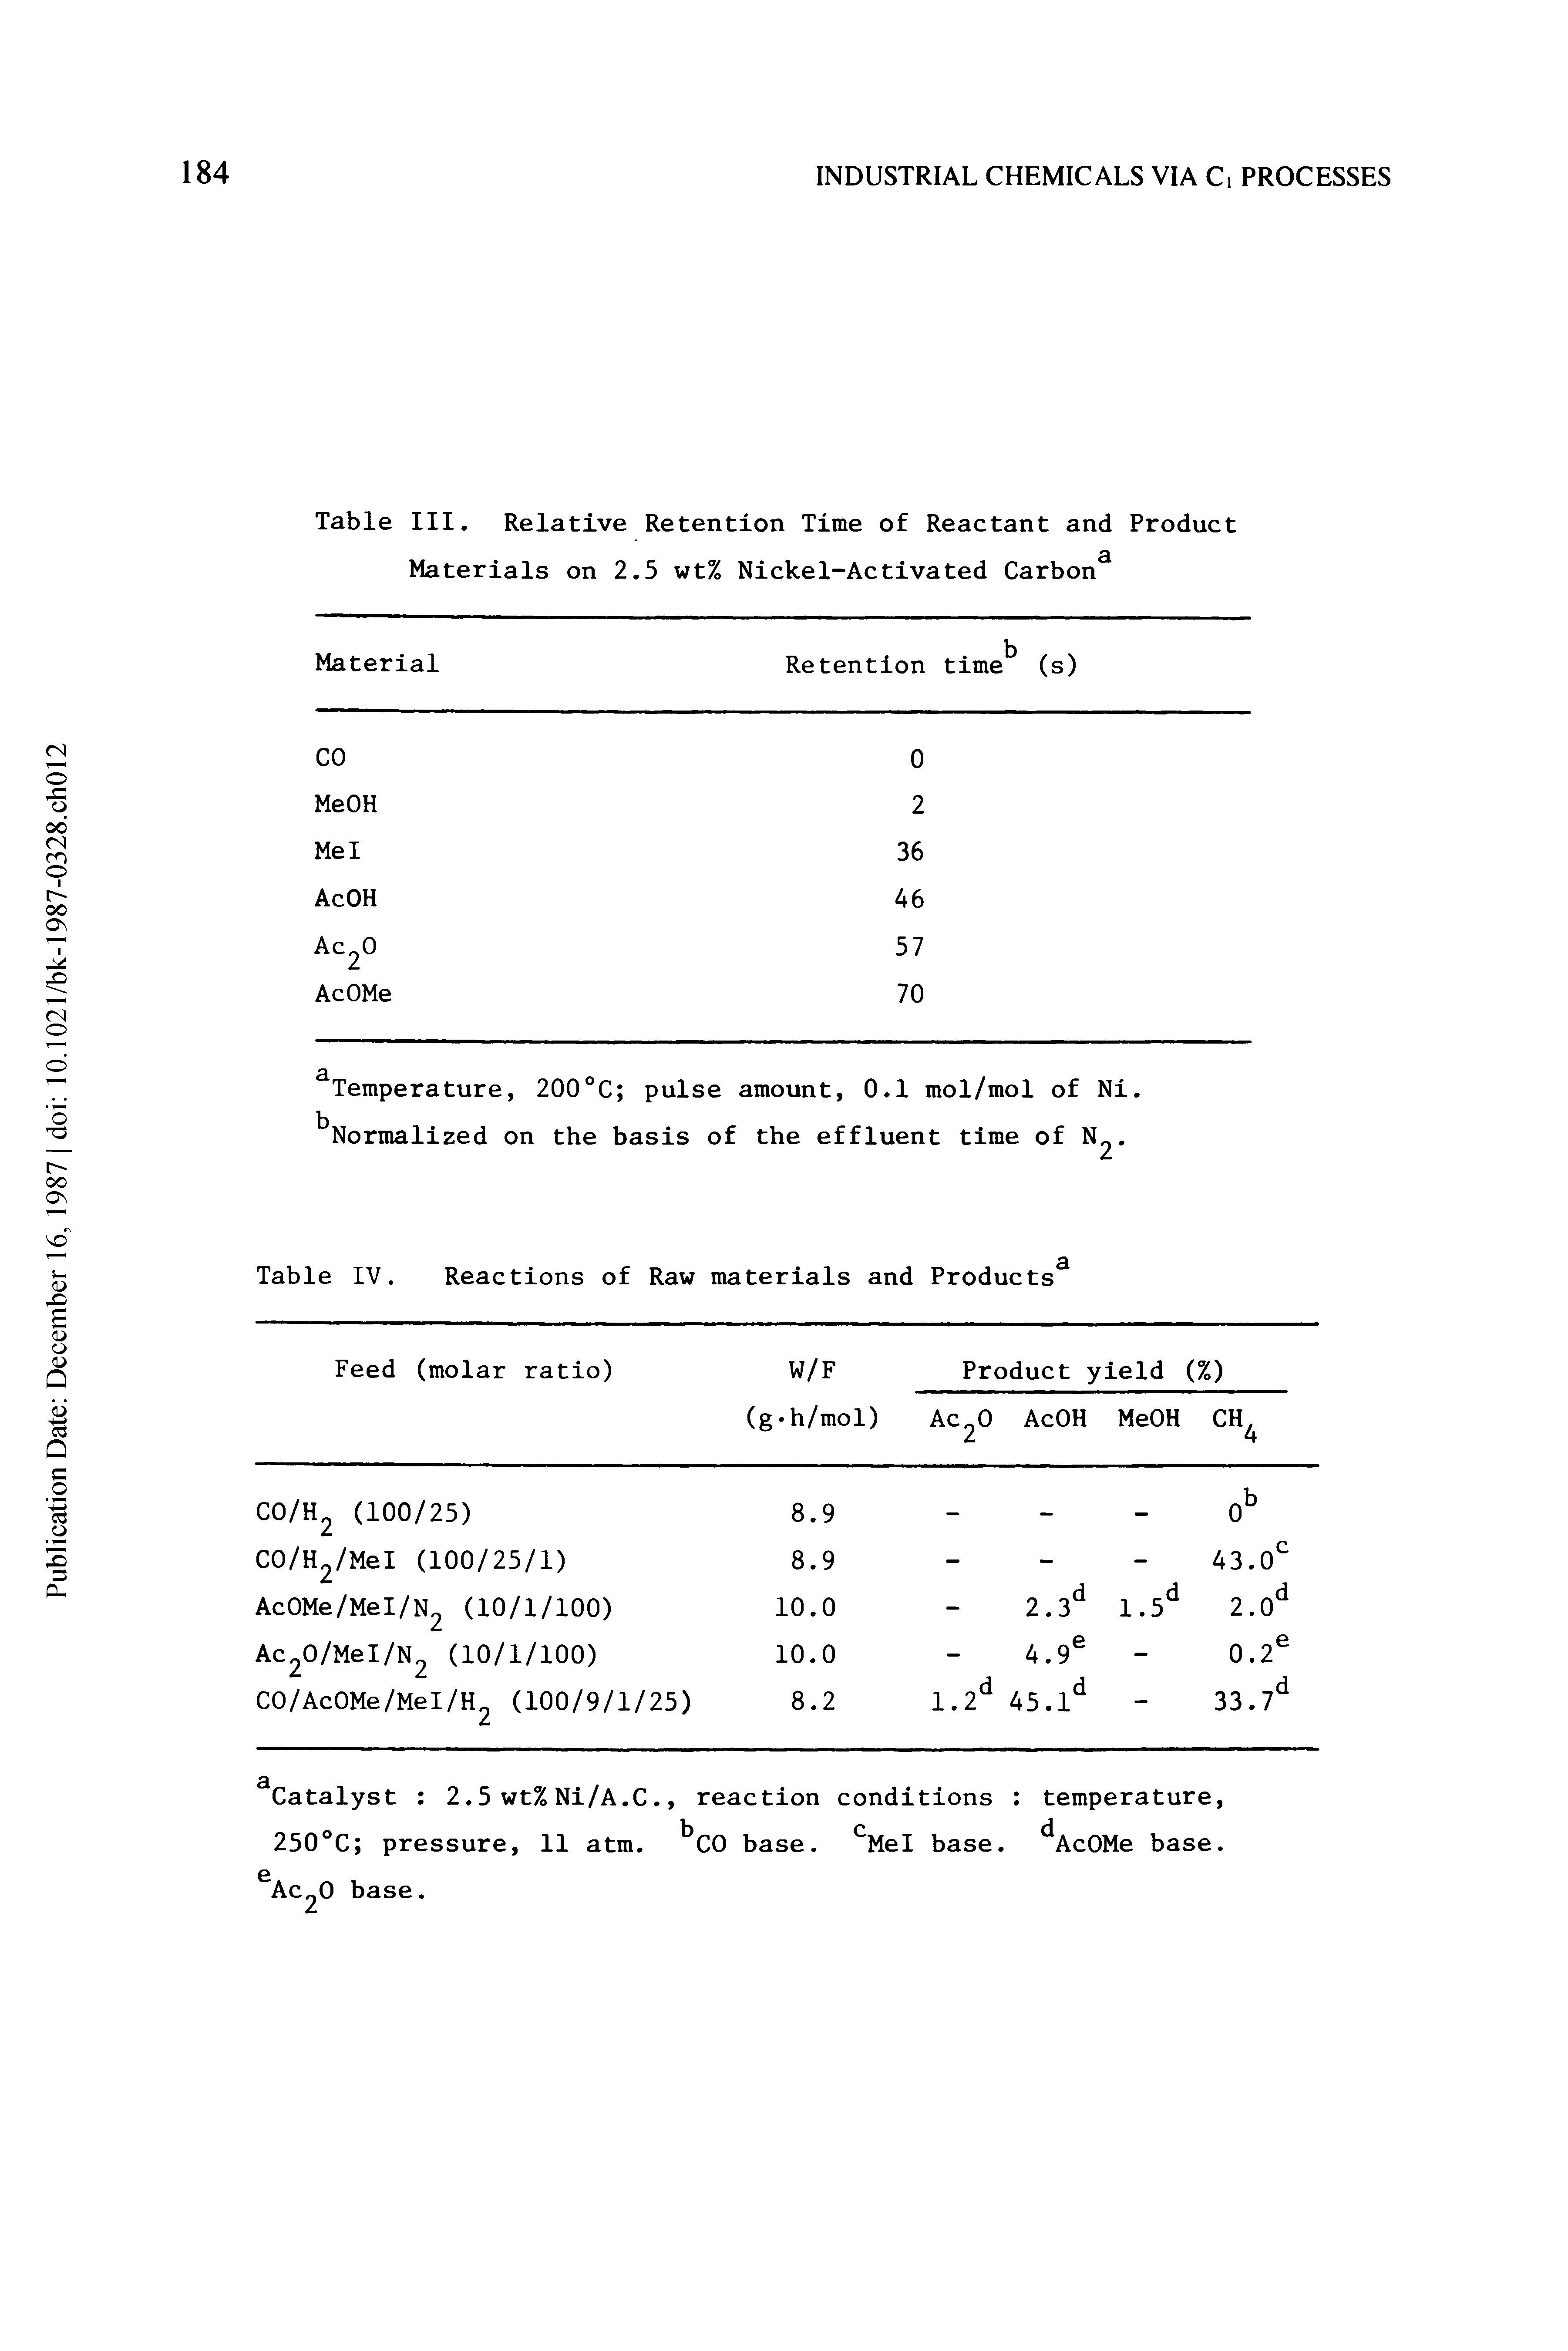 Table III. Relative Retention Time of Reactant and Product Materials on 2.5 wt% Nickel-Activated Carbon ...